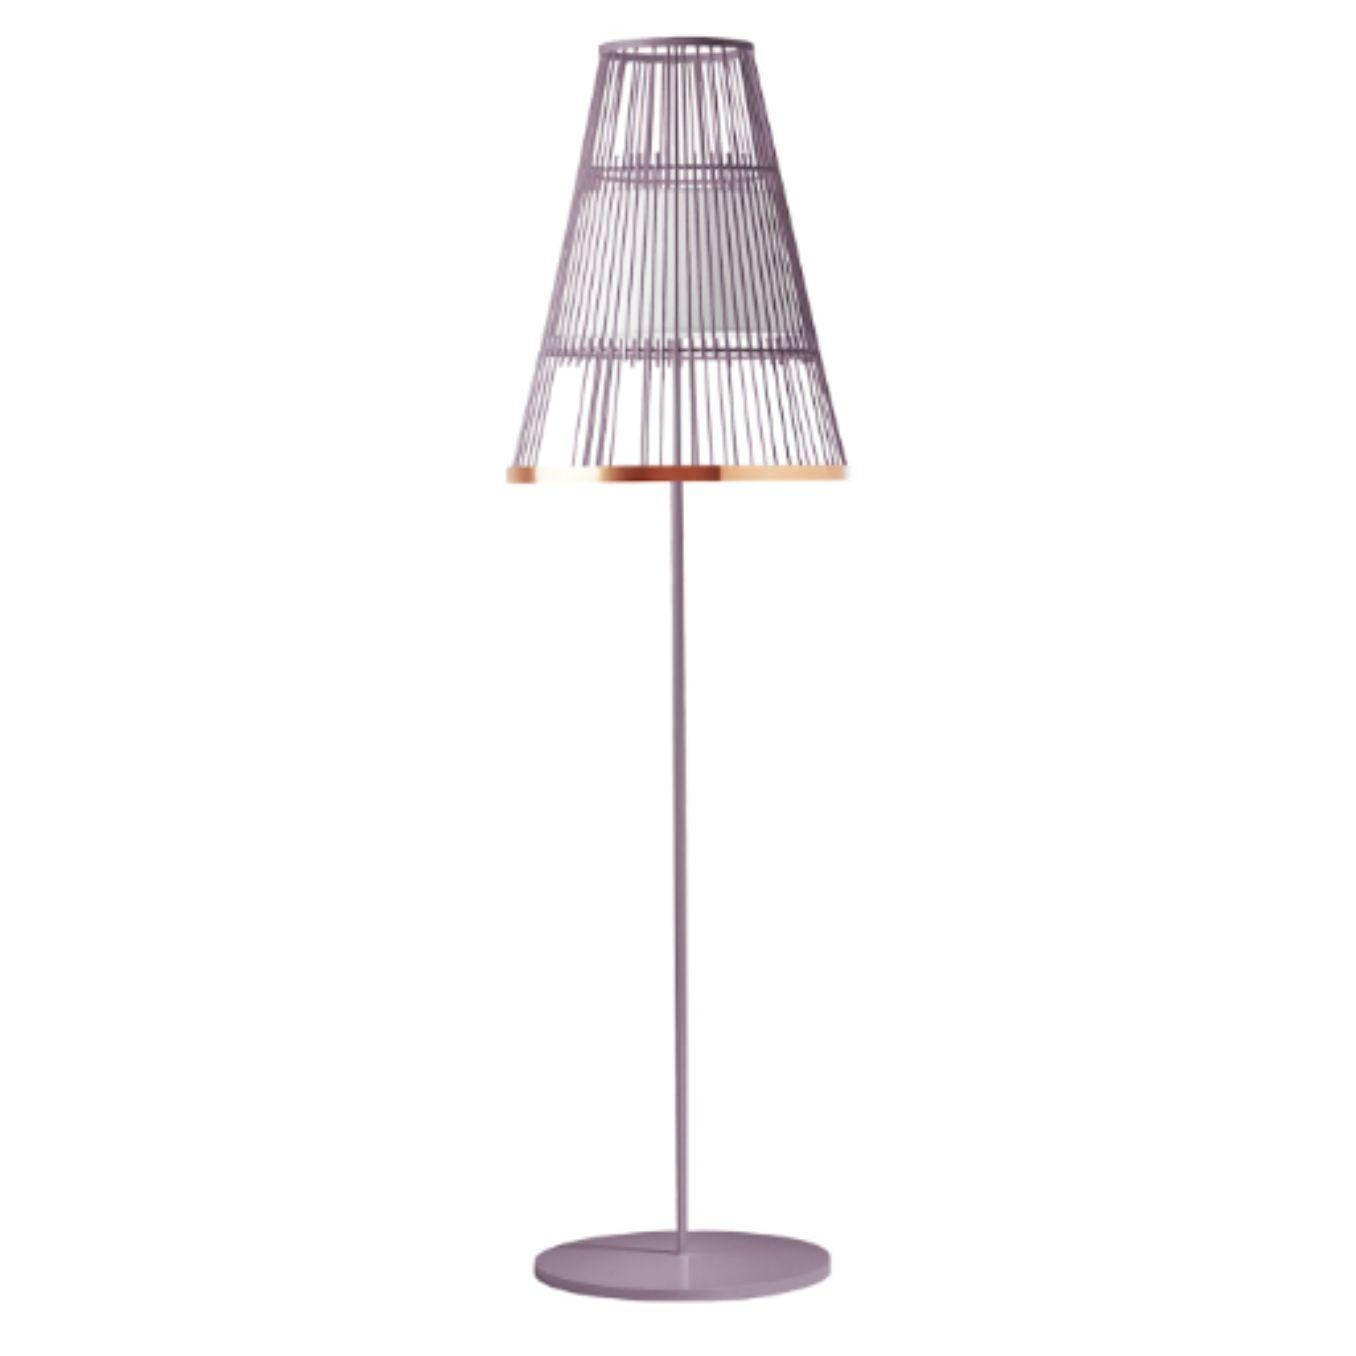 Lilac Up floor lamp with copper ring by Dooq
Dimensions: W 47 x D 47 x H 170 cm
Materials: lacquered metal, polished or brushed metal, copper.
Abat-jour: cotton
Also available in different colors and materials.

Information:
230V/50Hz
E27/1x20W